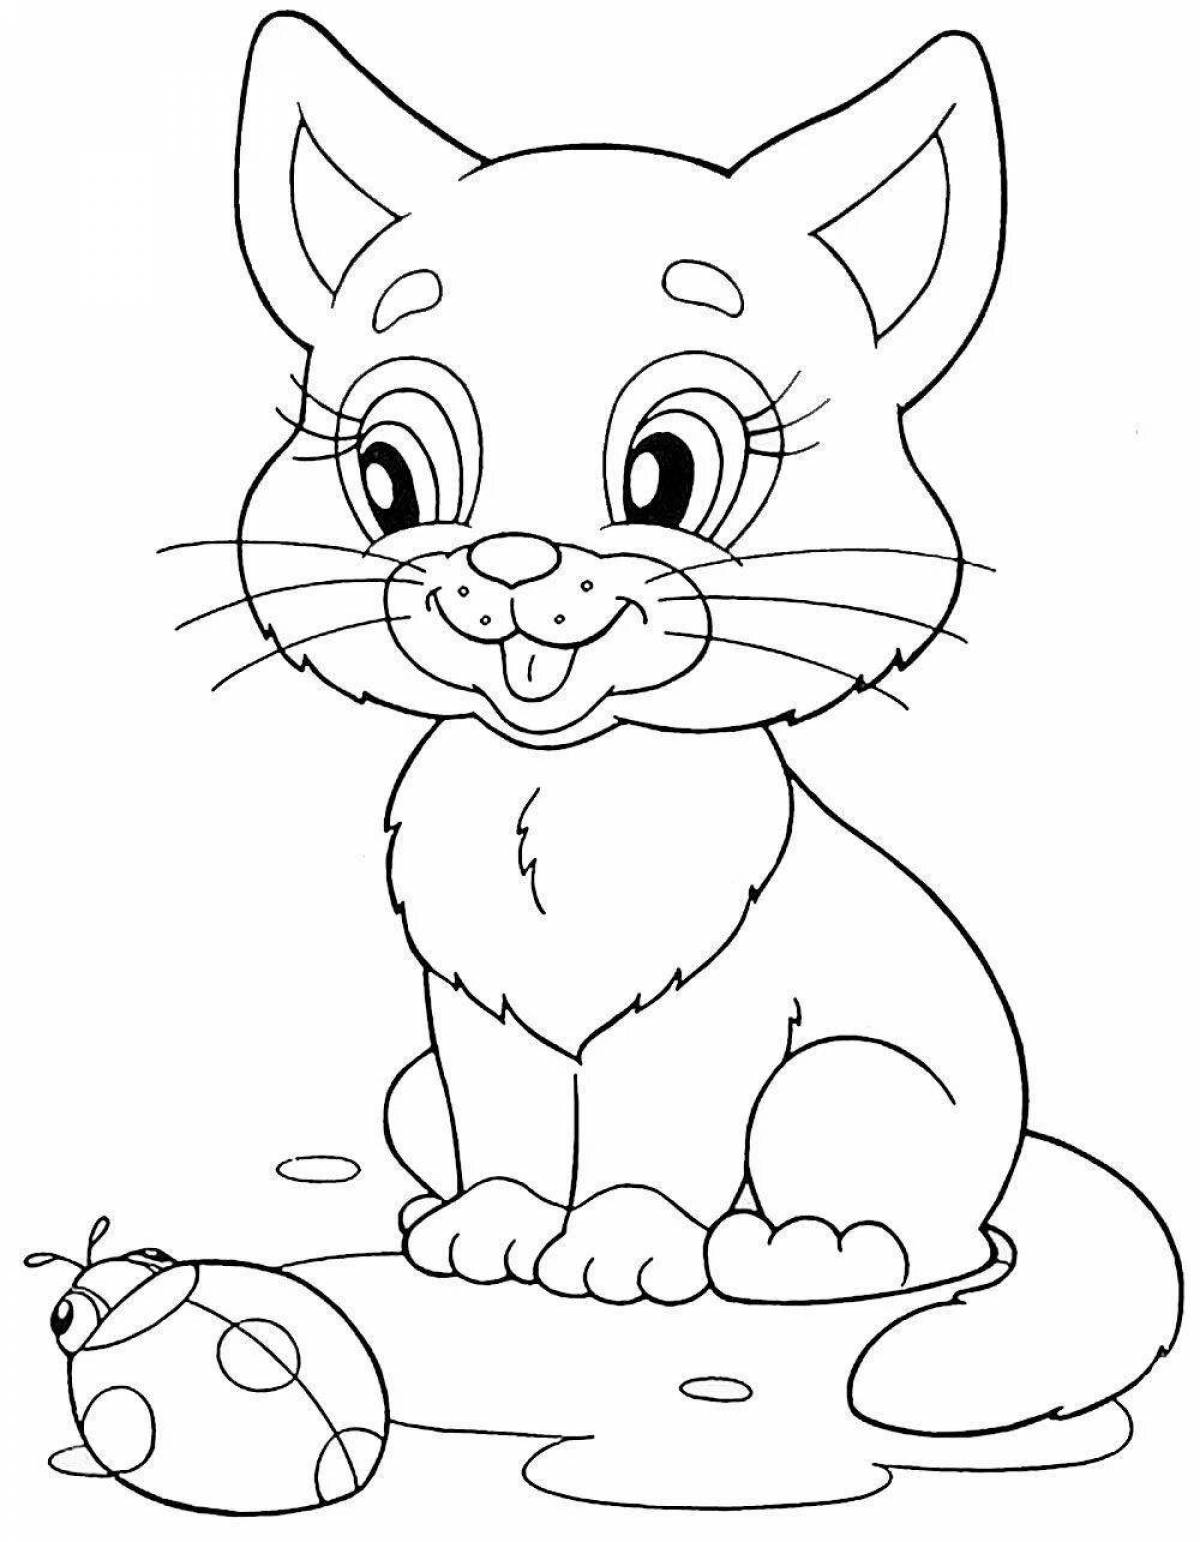 Kitty magic coloring book for kids 5-6 years old